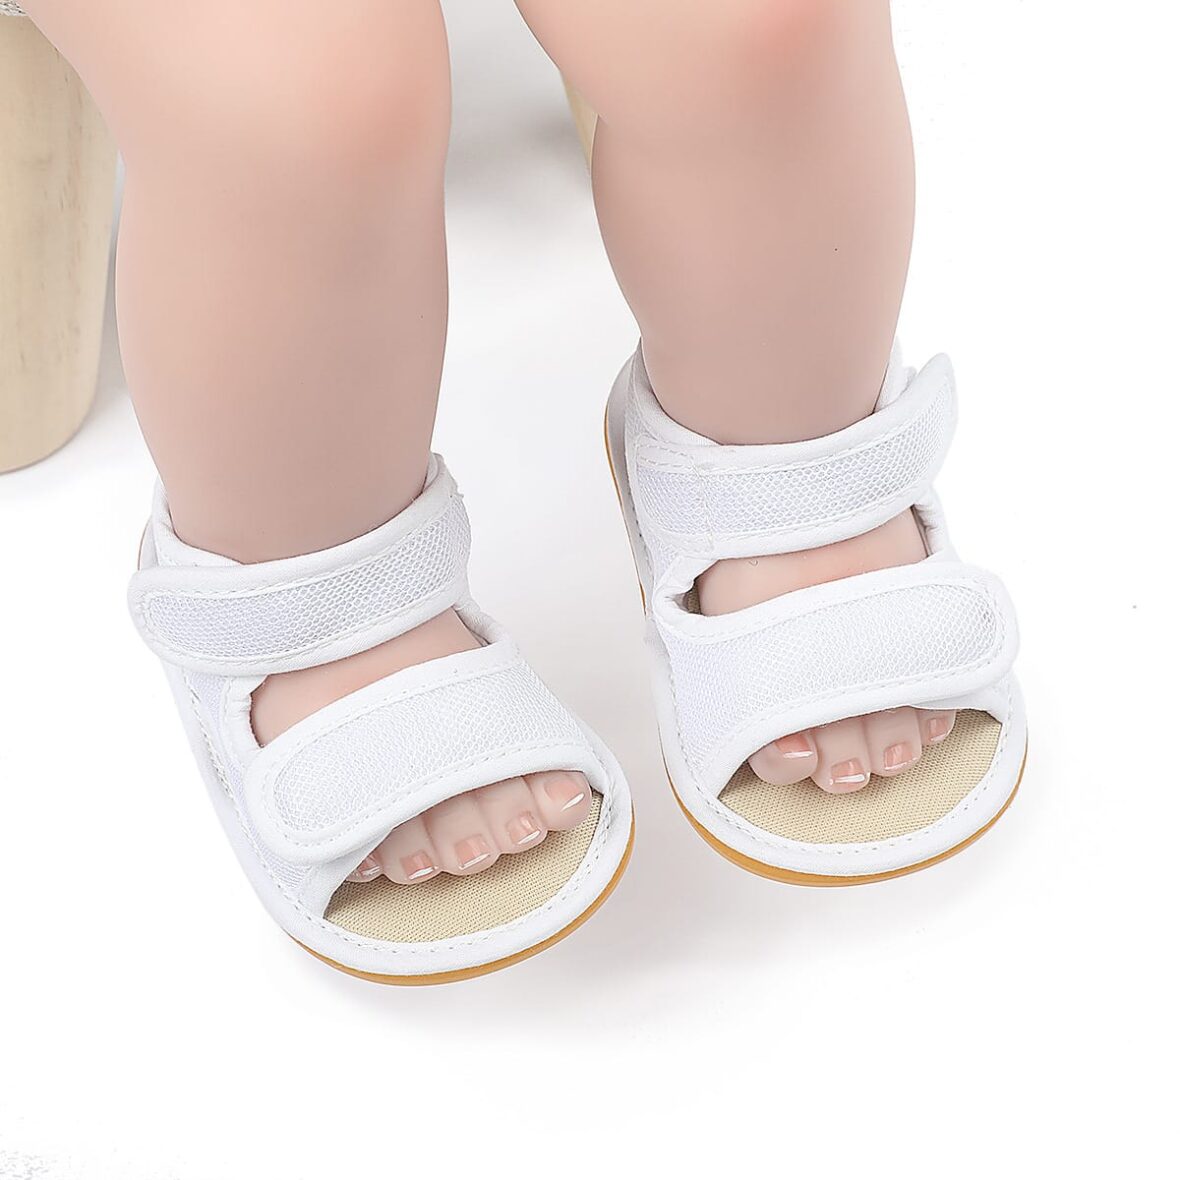 Double Strap Baby Boy Baby Girl Soft Sole Sandals (3)